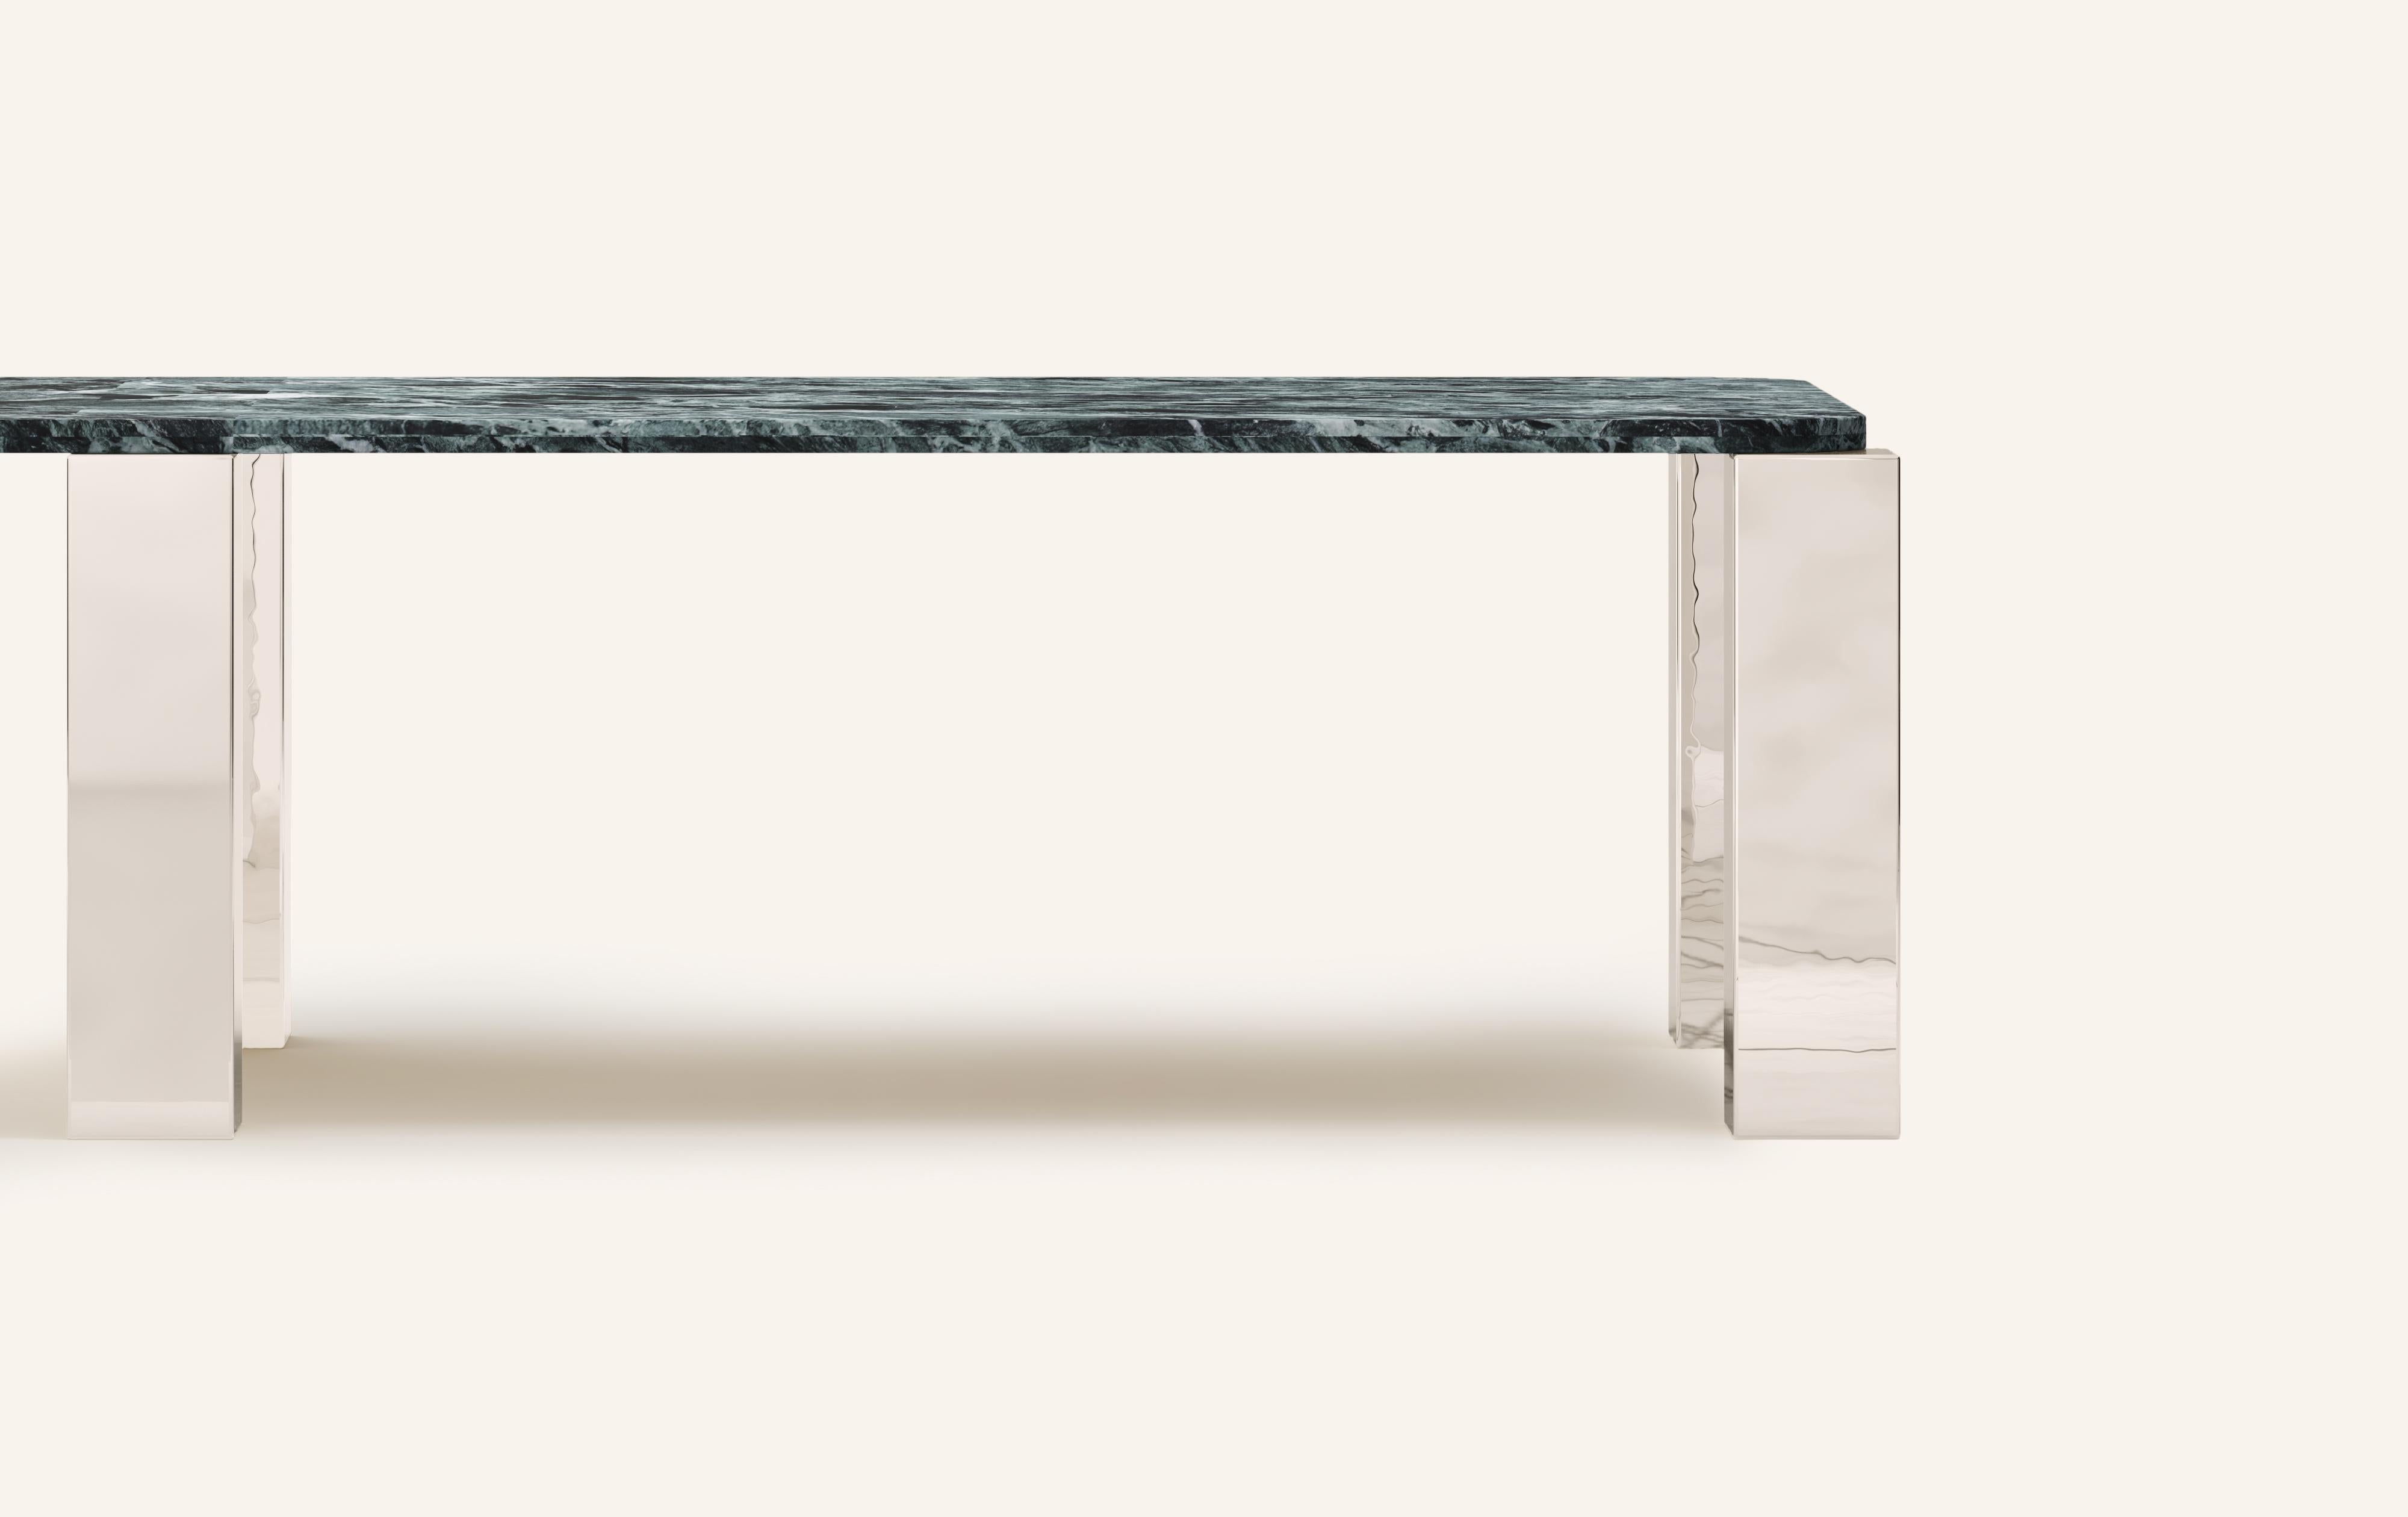 American FORM(LA) Cubo Rectangle Dining Table 146”L x 50”W x 30”H Verde Marble & Chrome For Sale